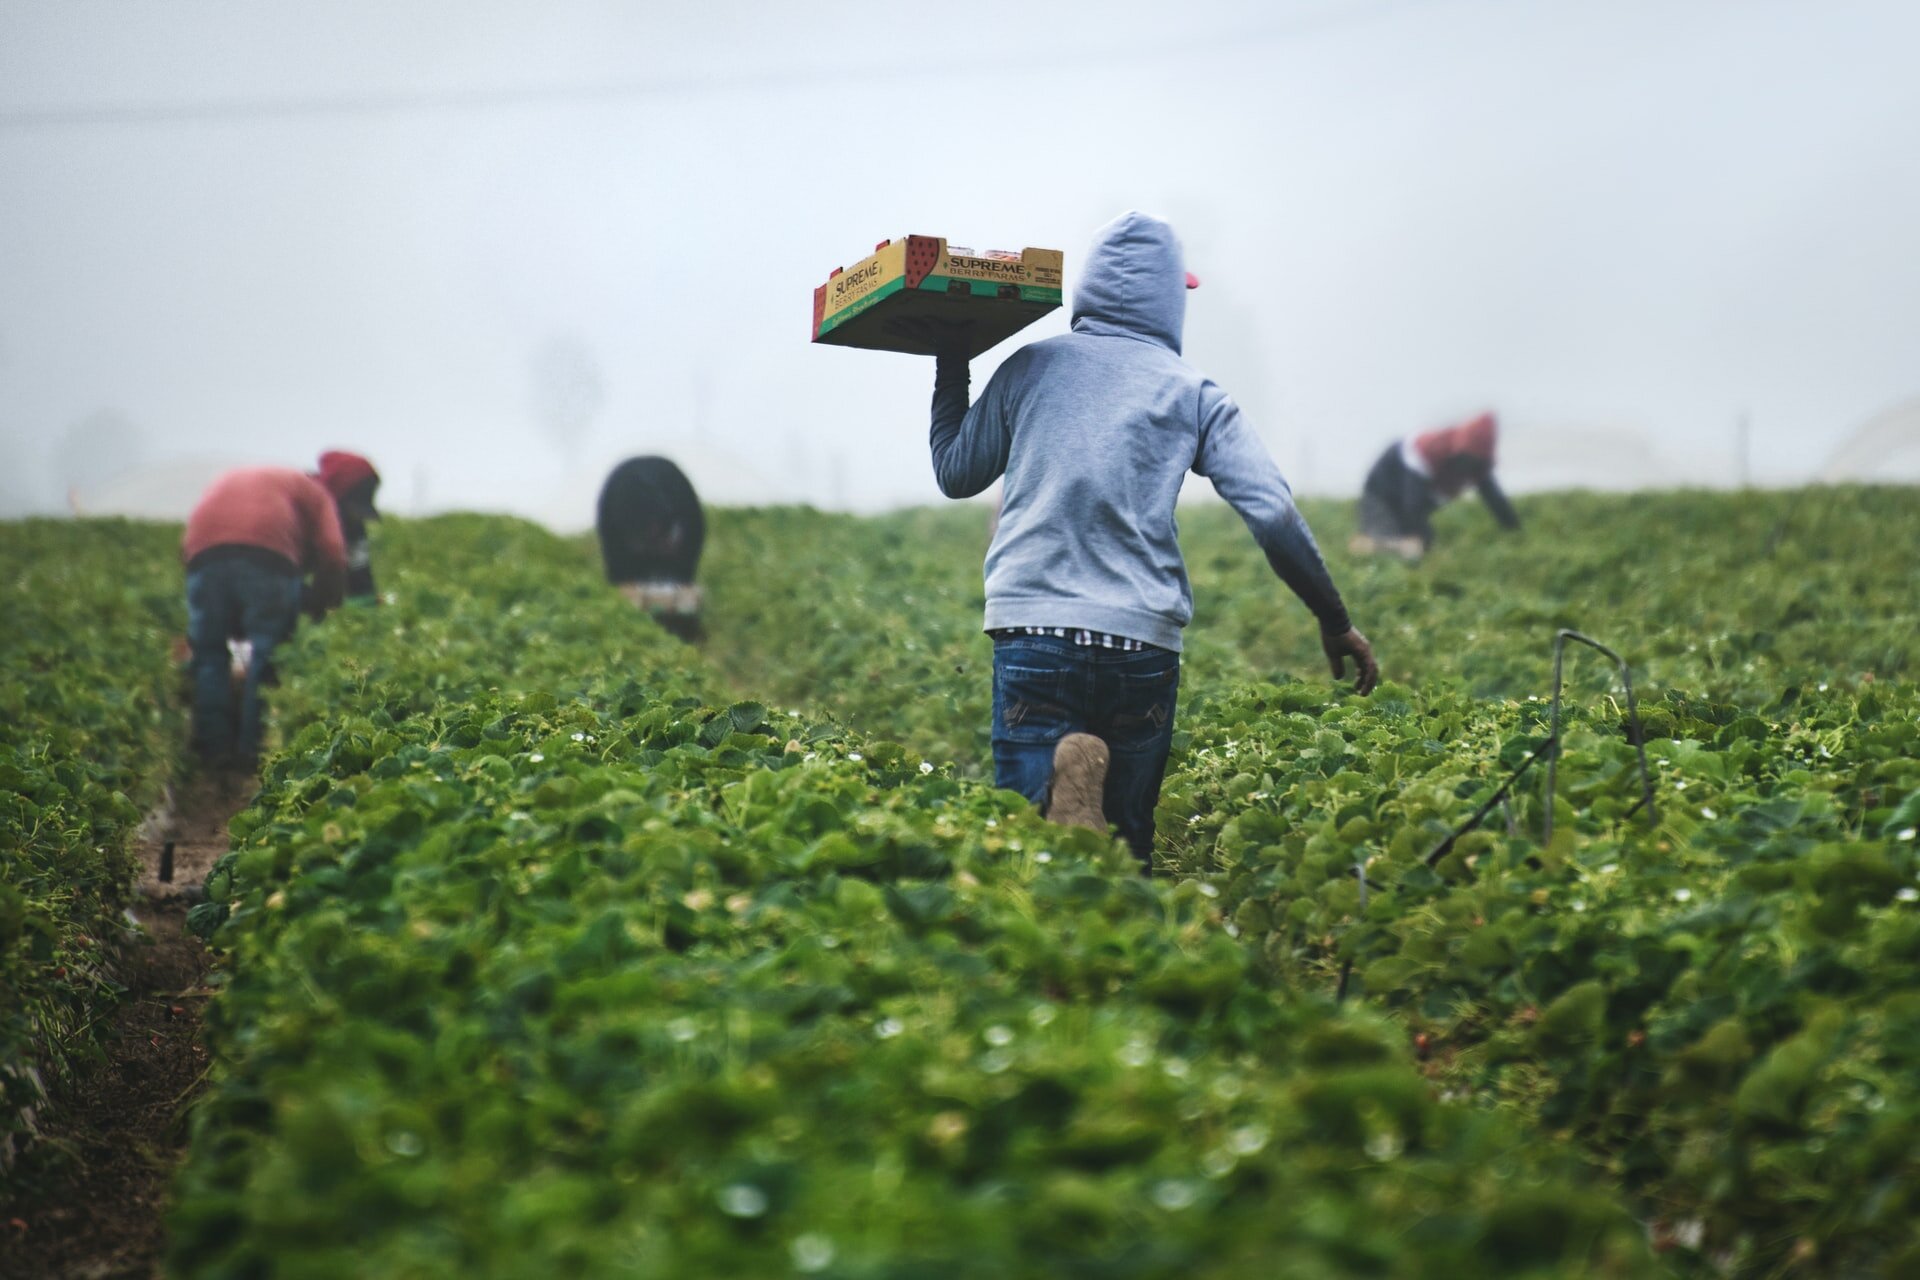 Image description: A farmworker wearing long pants and a hooded sweatshirt runs between rows in a field carrying a full pallet of strawberries. Other workers are bent over in the background harvesting. Image credit: Tim Mossholder.